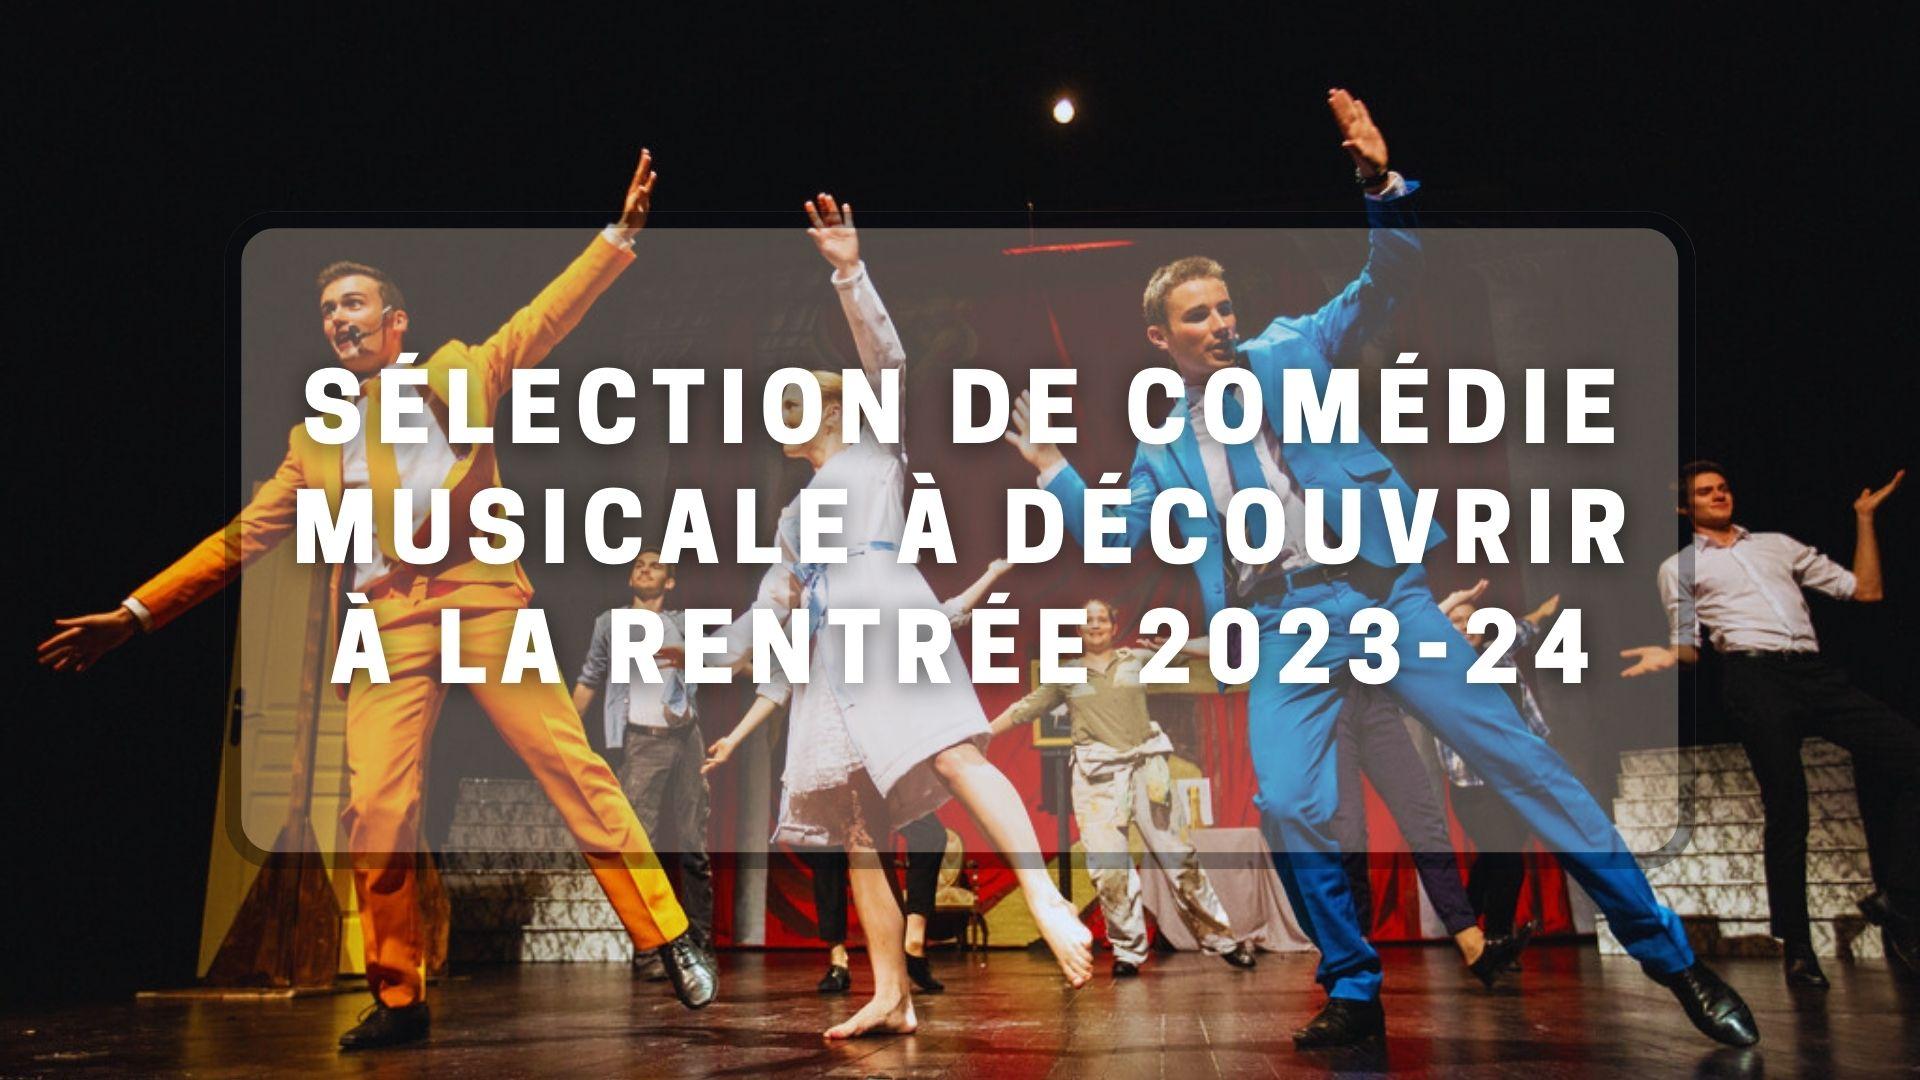 Article comedie musicale